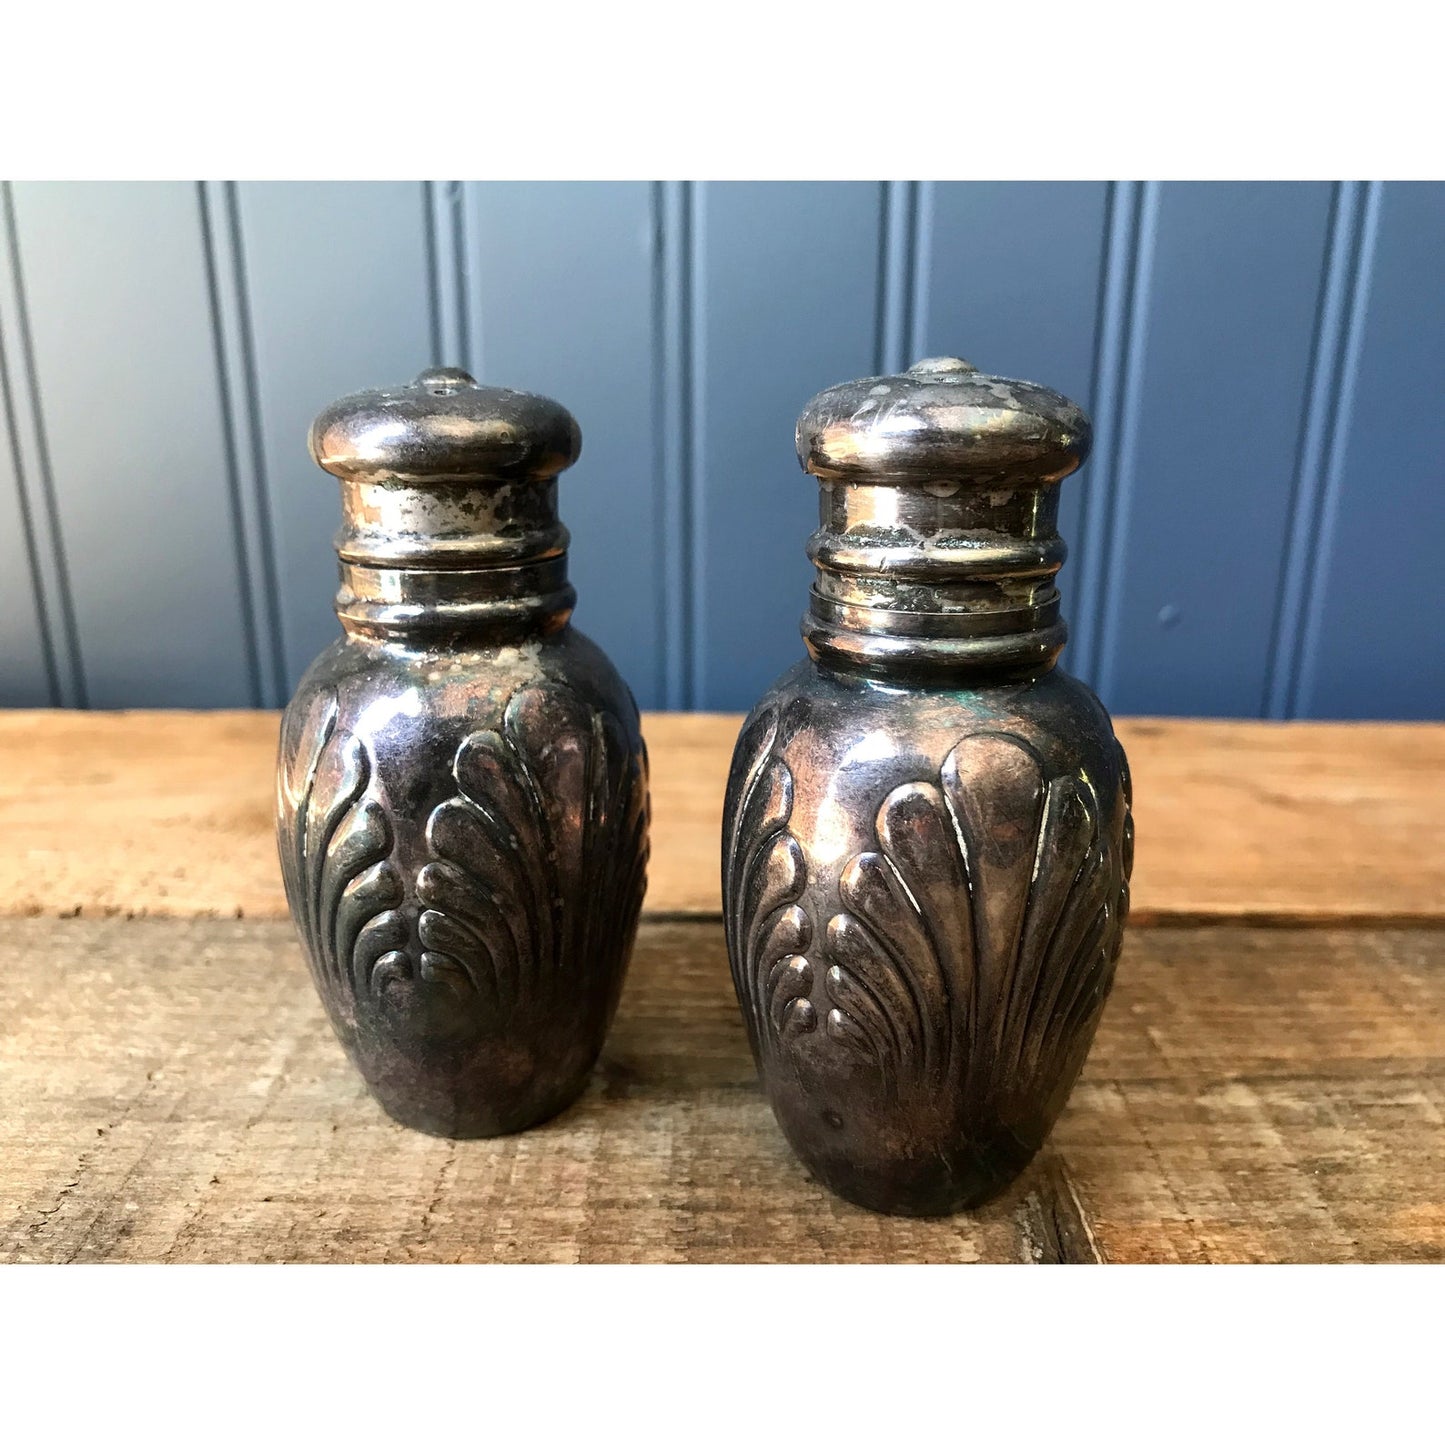 R Wallace & Sons Mfg Co Silver Salt & Pepper Shakers